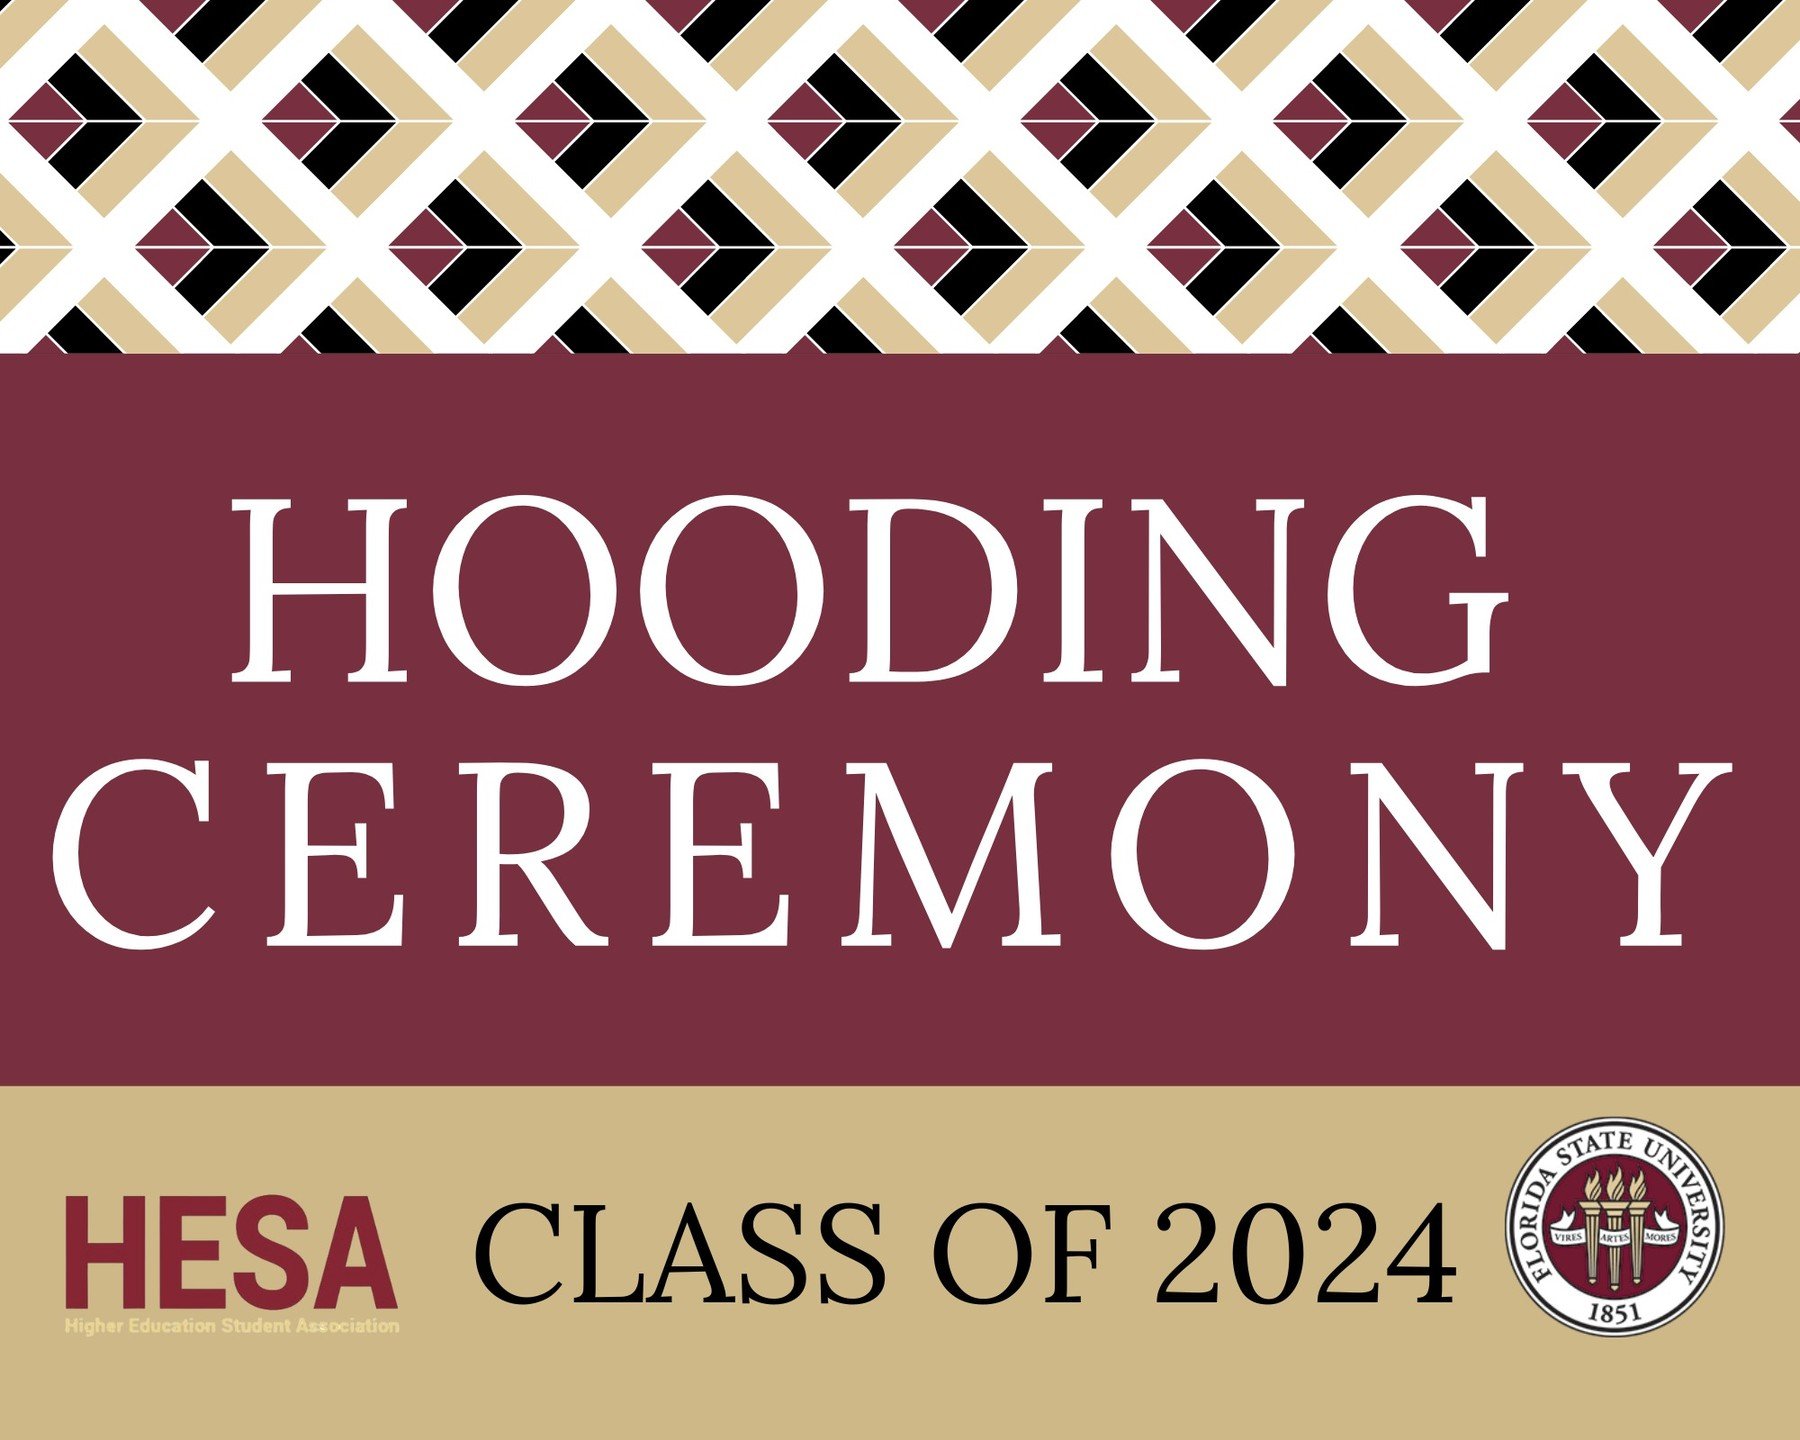 📈Level up! Officially a Masters of Science in Higher Education from CEHHS. Here's to shaping the future of learning! #CEHHSGrads #MastersDegree #HESA #FSUHESA